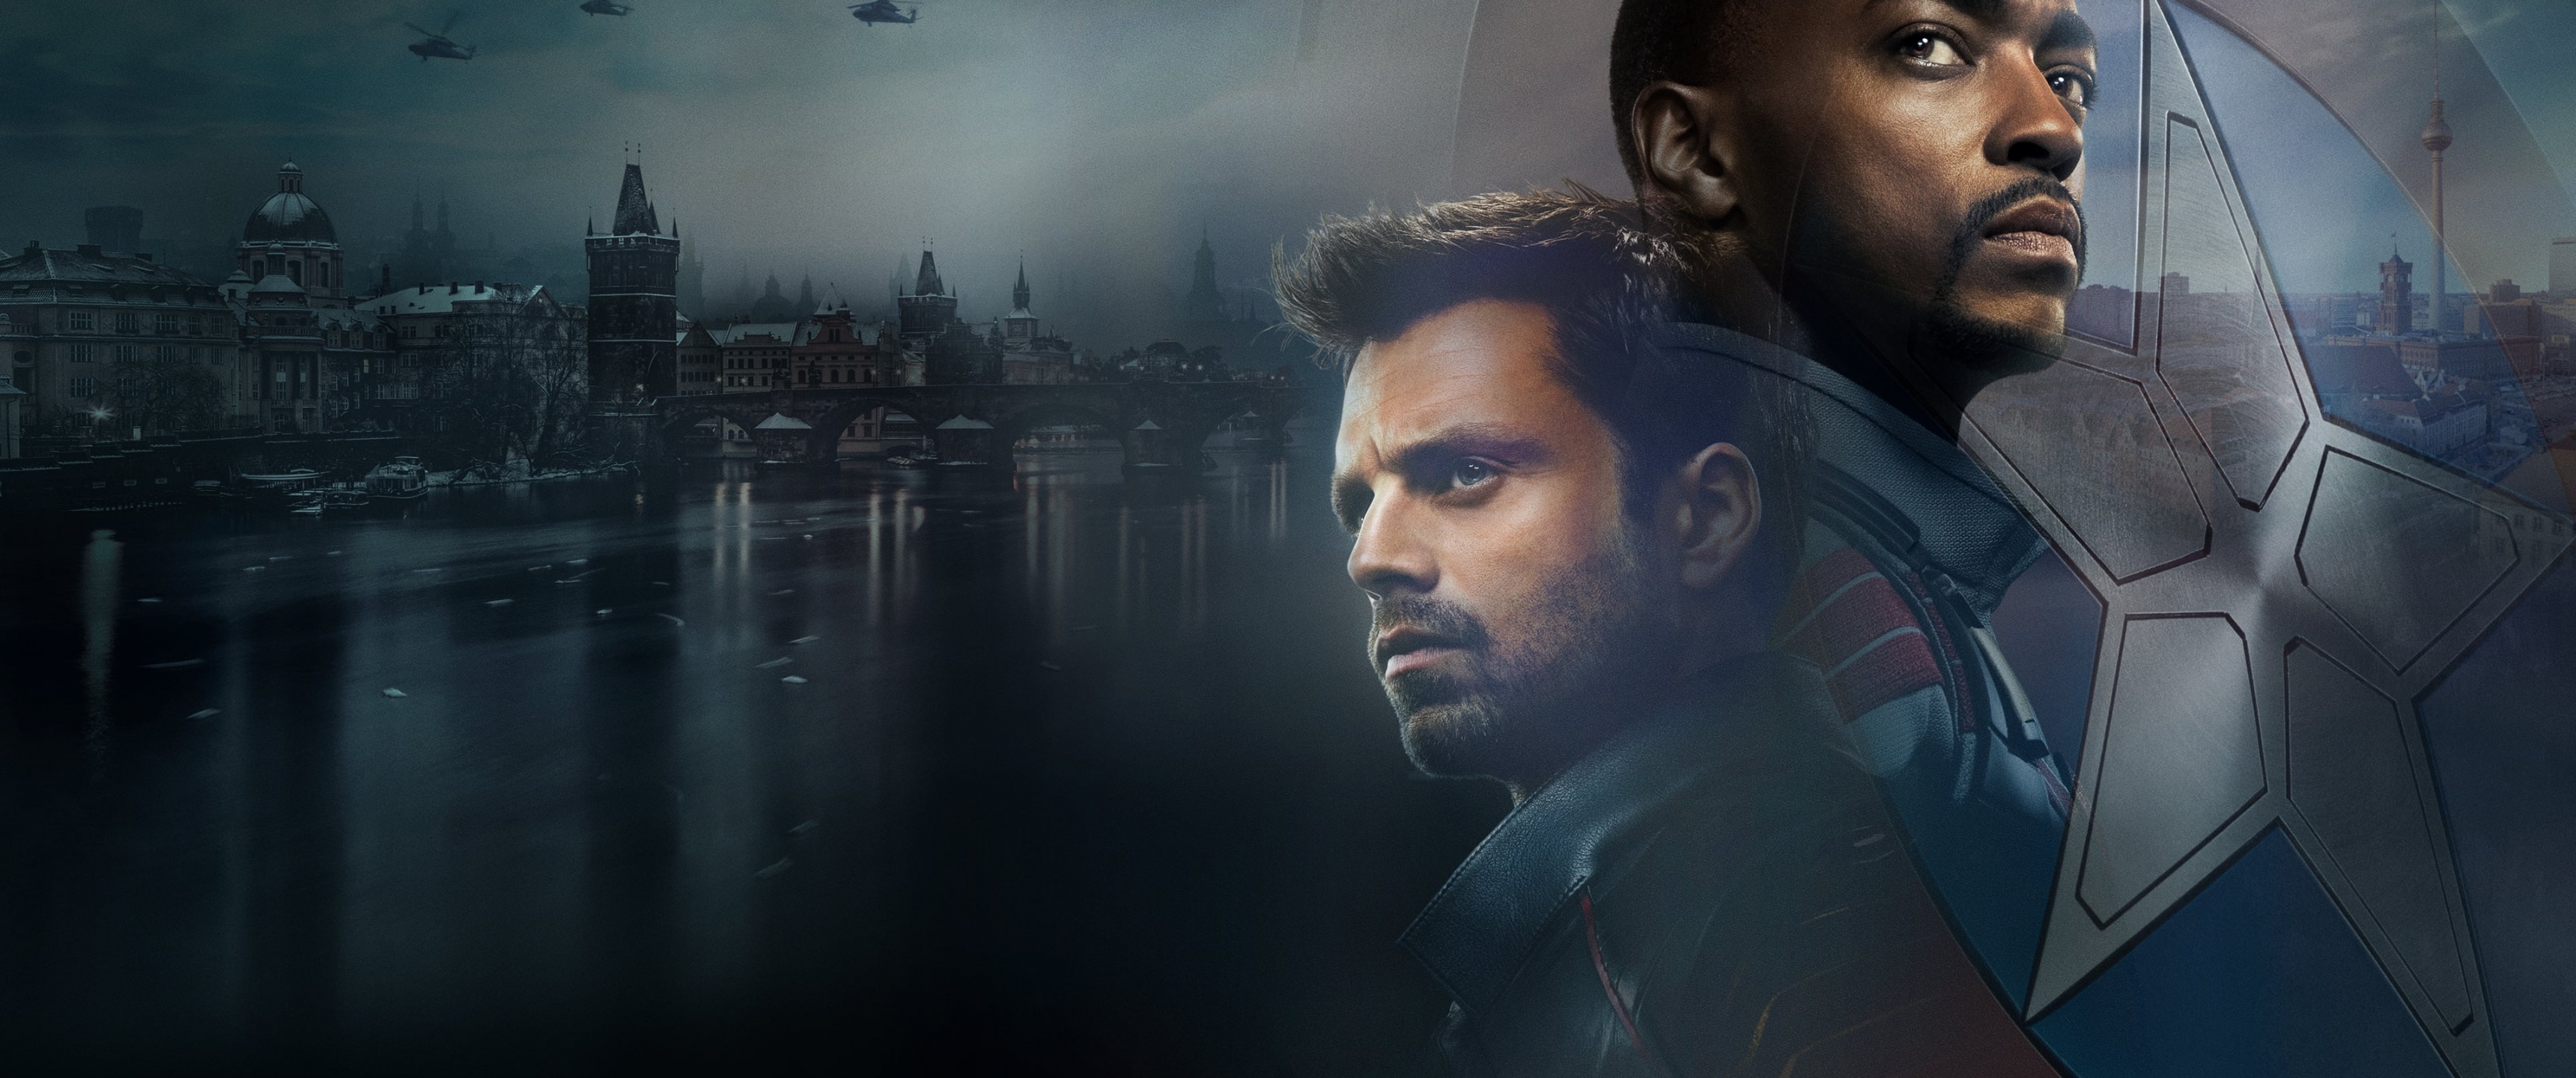 The Falcon and the Winter Soldier Wallpaper 4K, TV series, Bucky Barnes, Sam Wilson, Movies